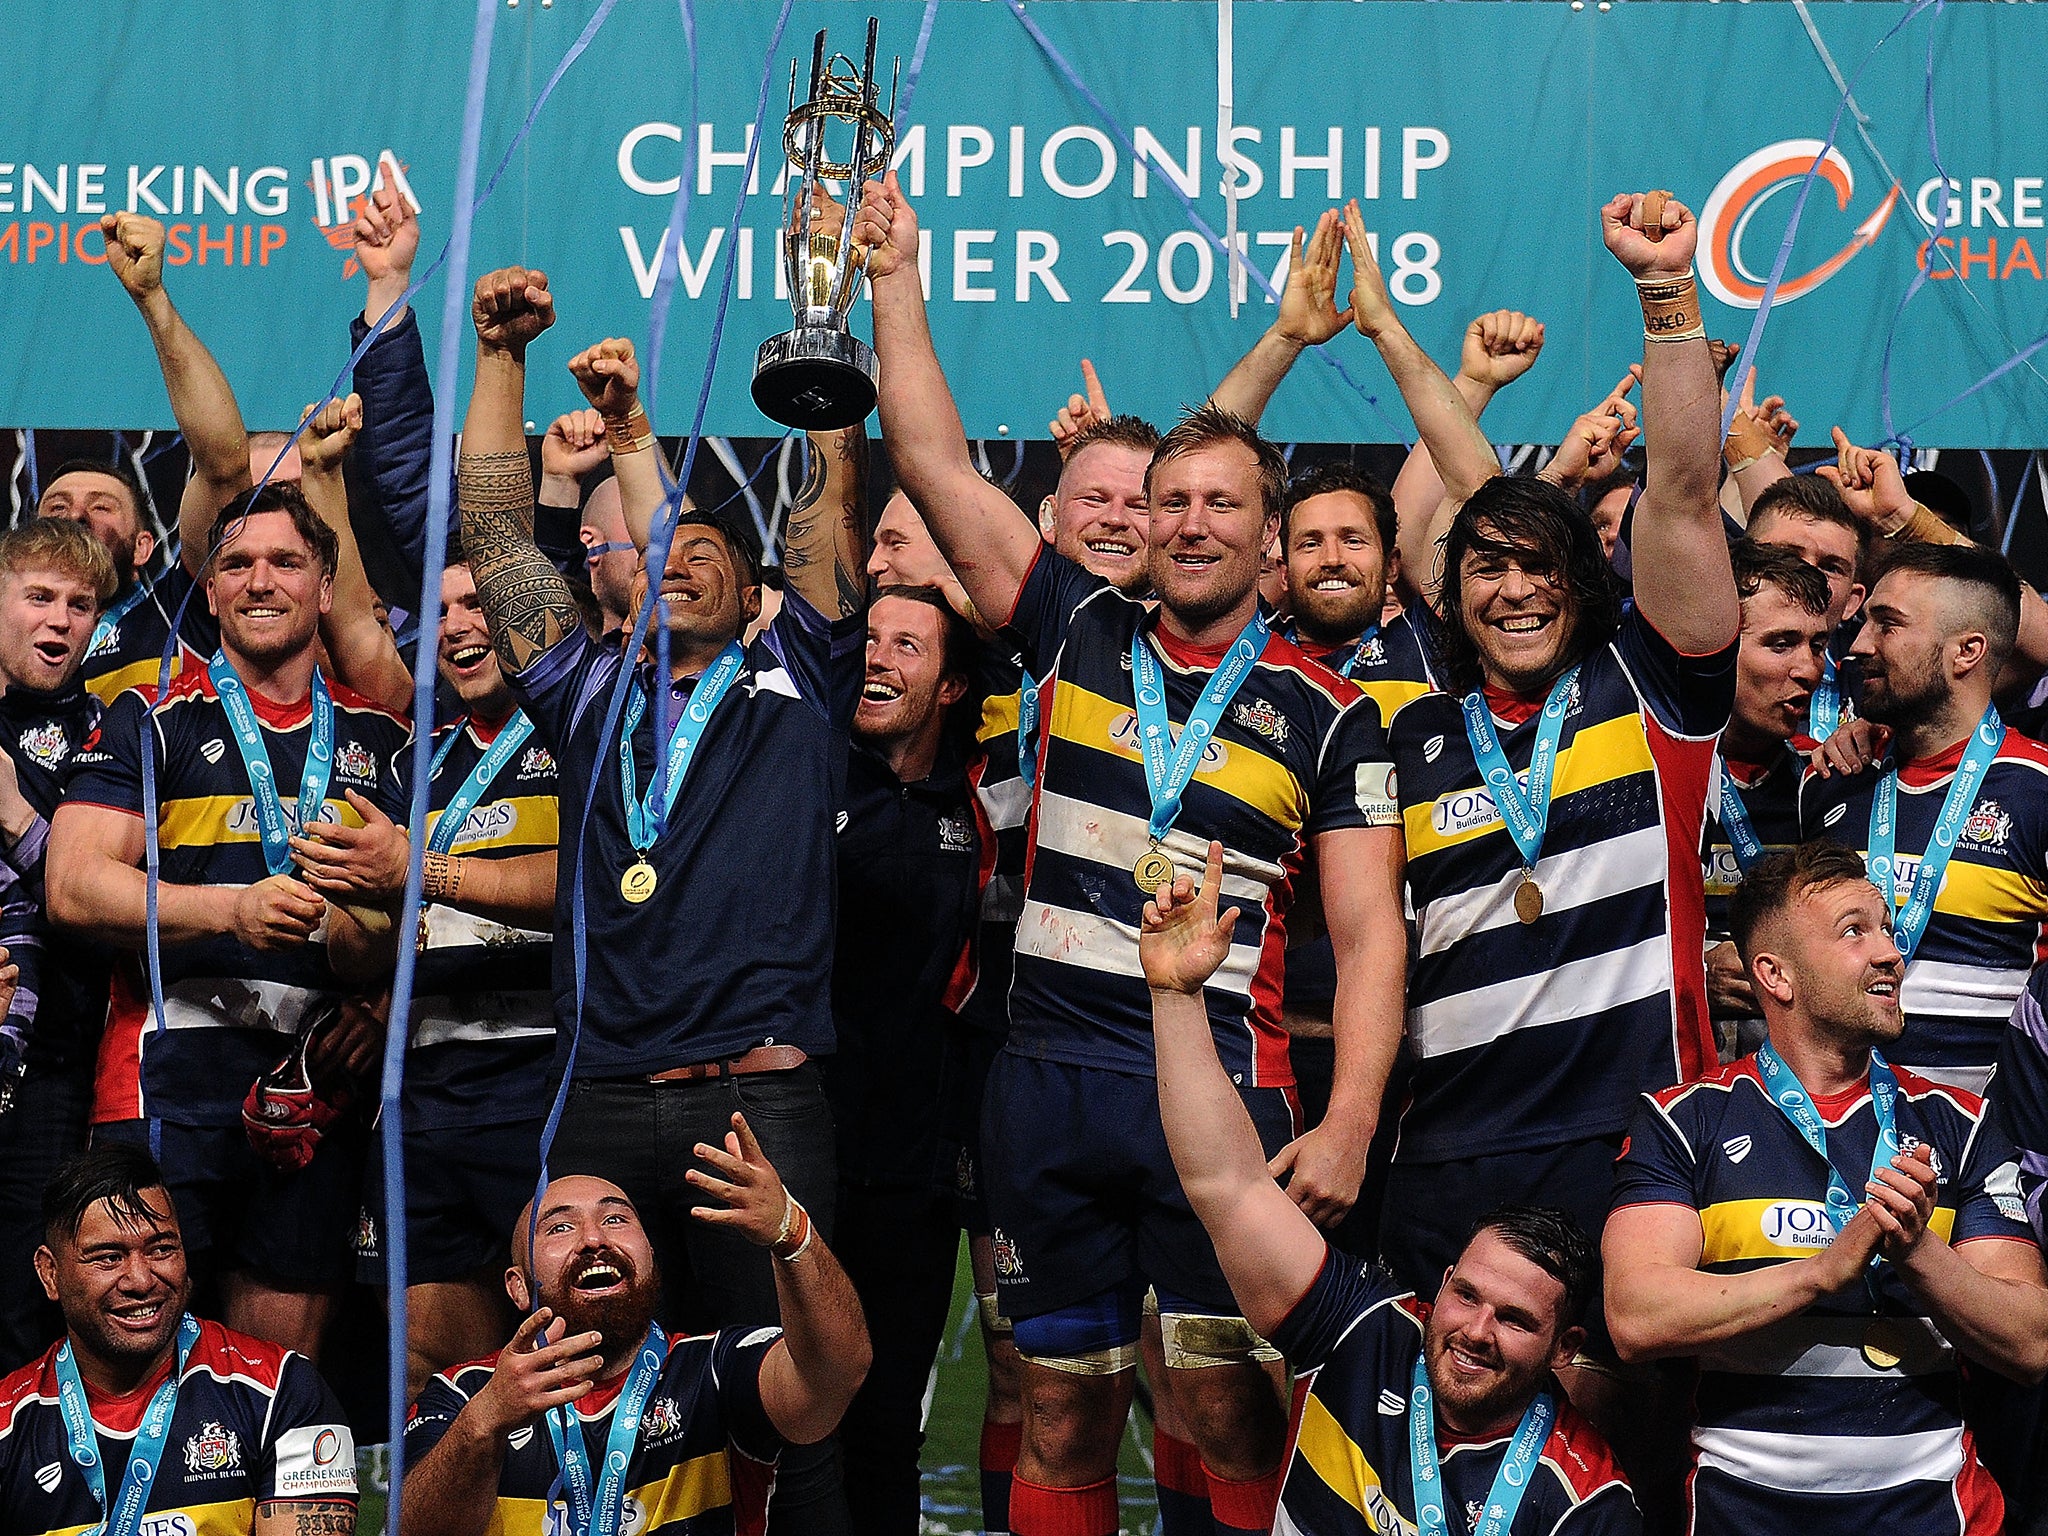 Bristol Rugby have announced a new name for next season